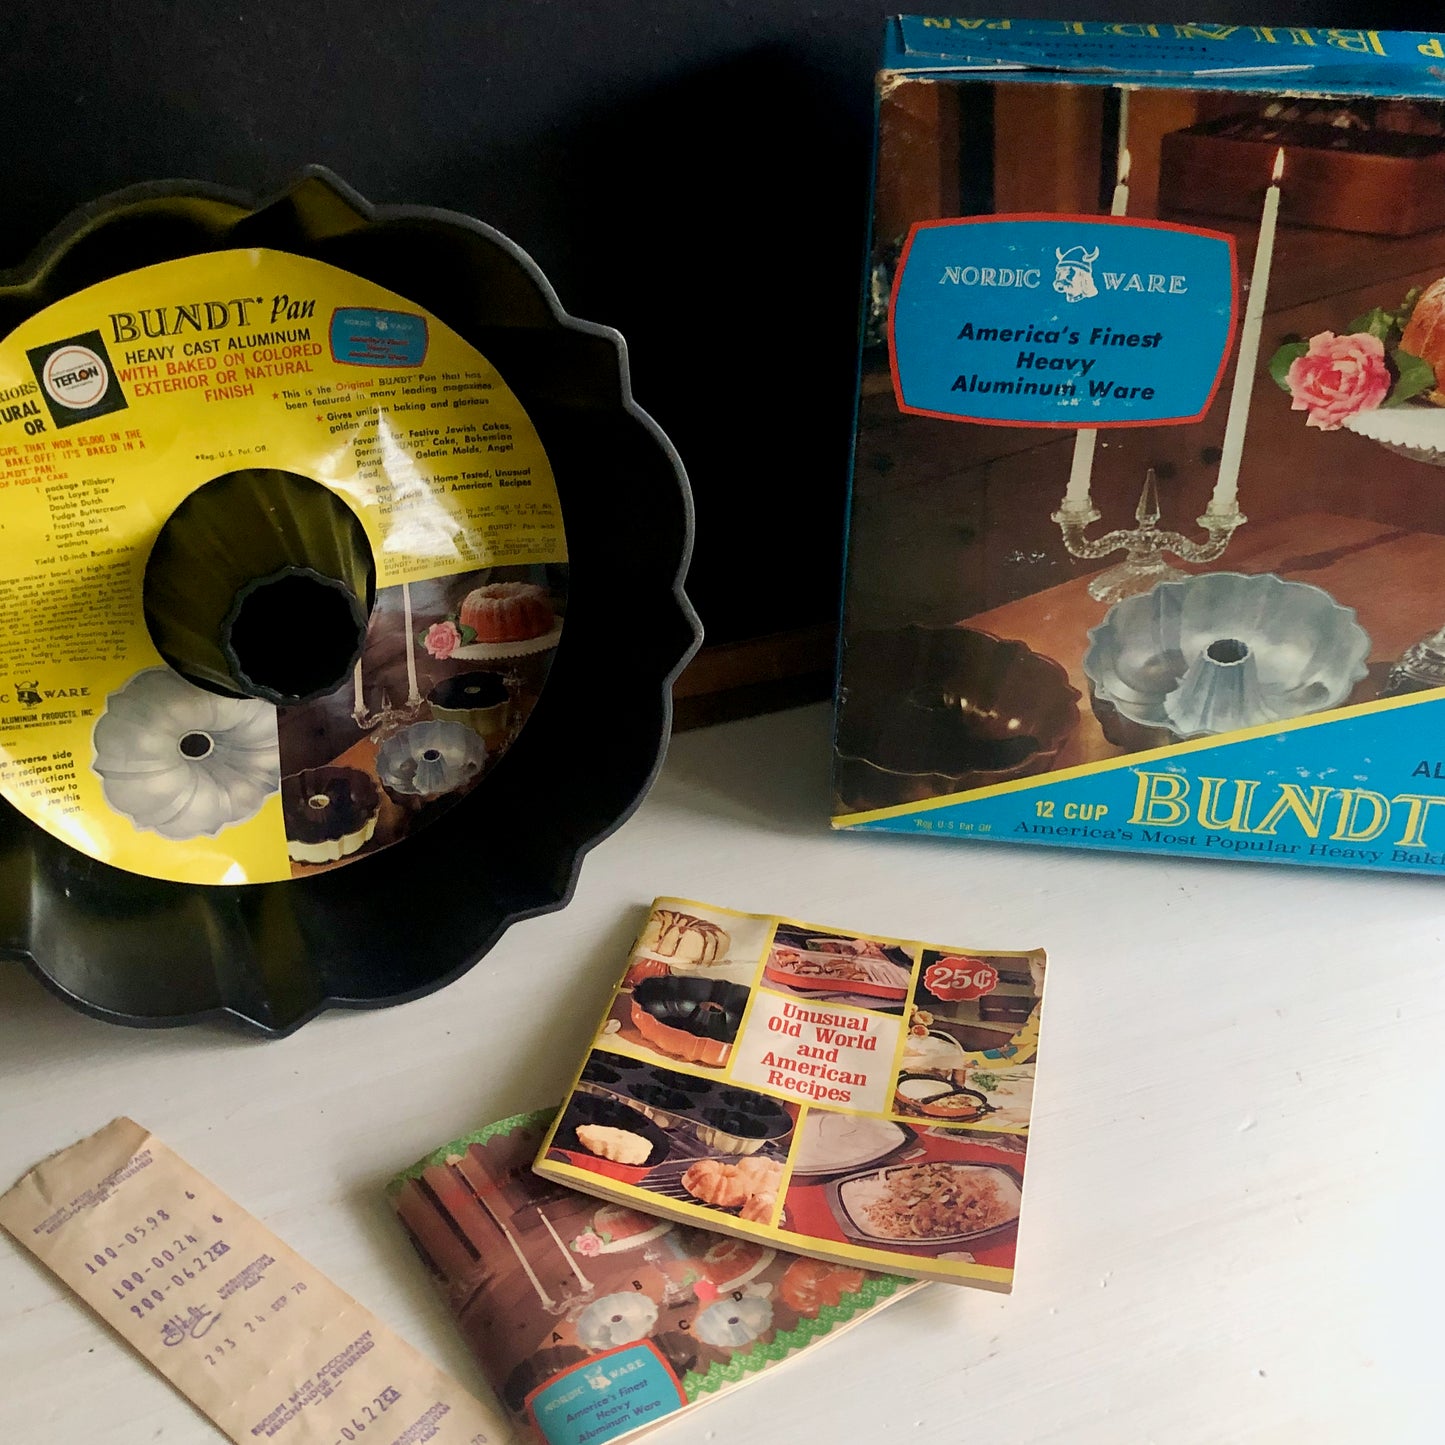 Vintage Nordic Ware Bundt Pan with Box and Recipe Booklets (c.1970)